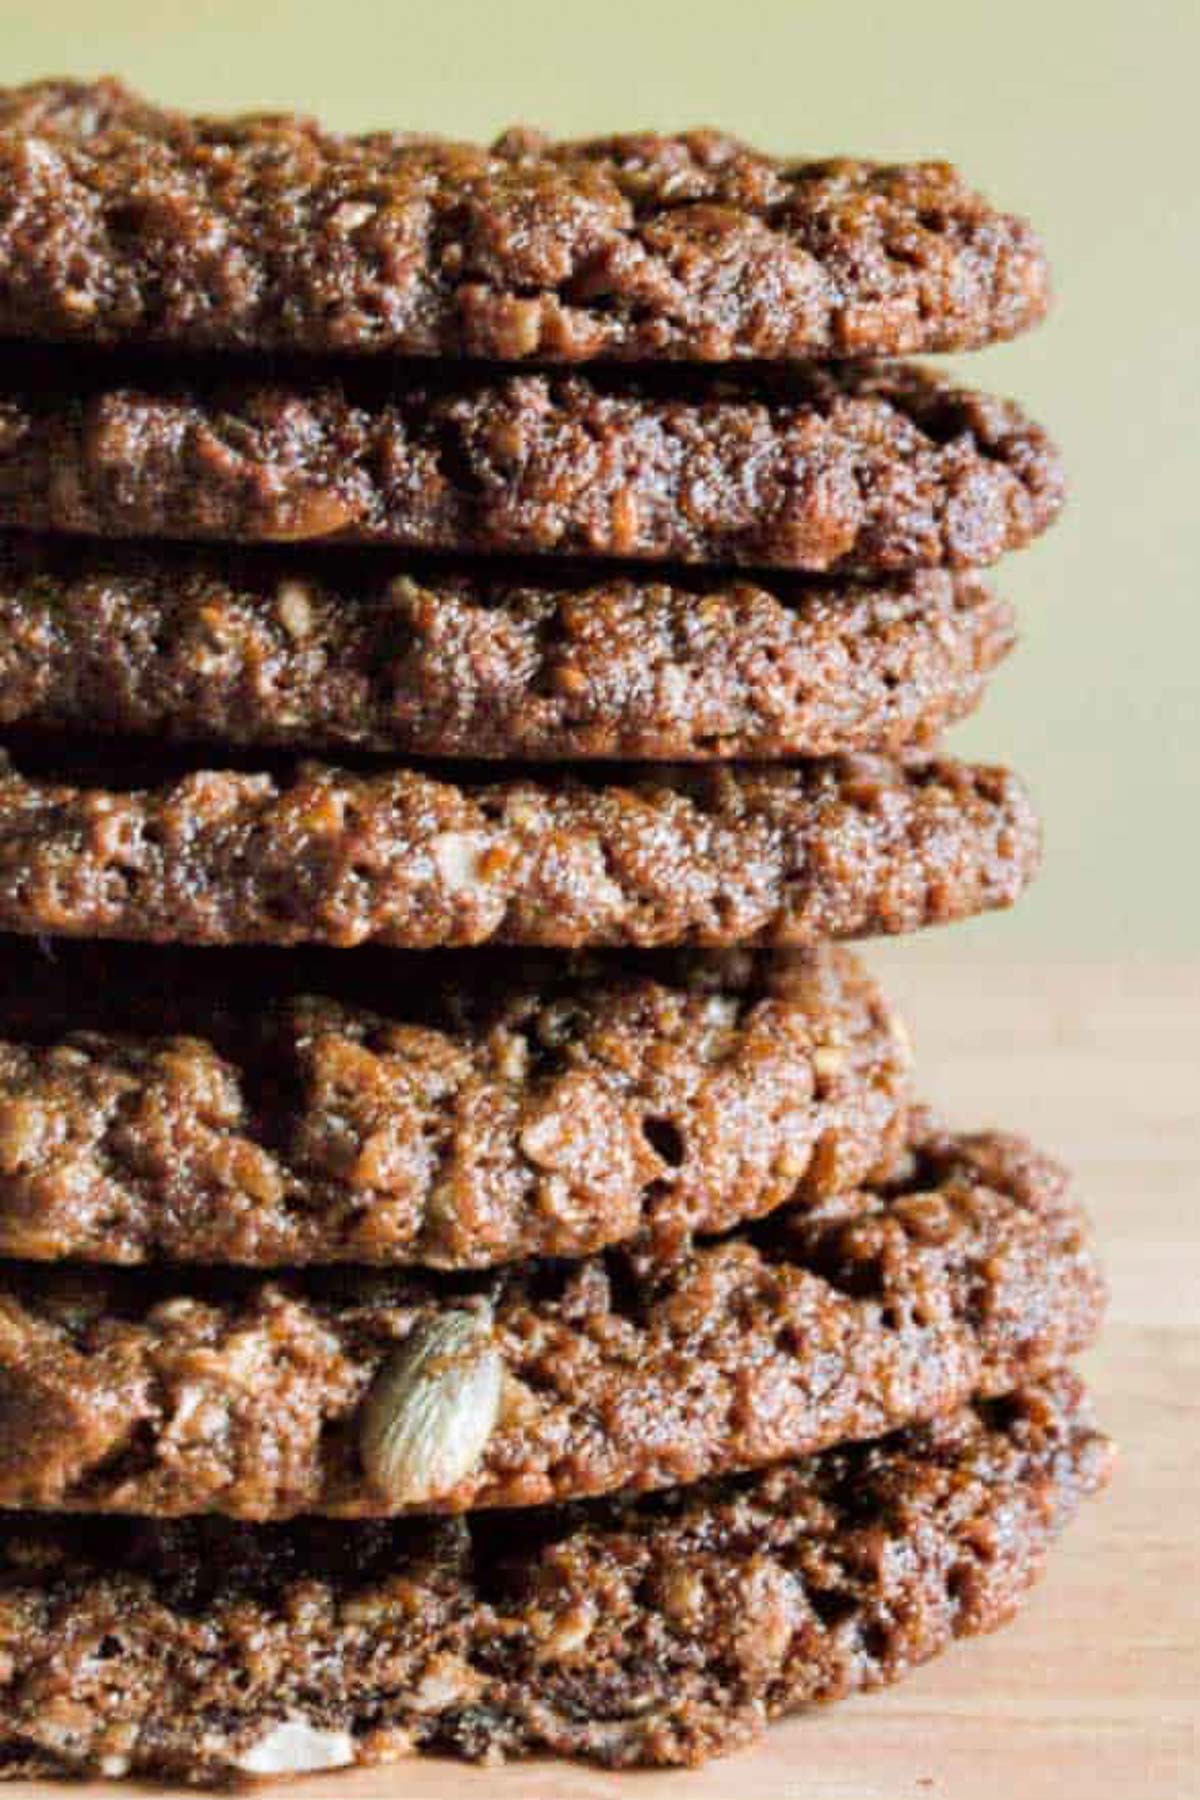 A stack of treacle oat cookies from Farmergirl Kitchen blog.